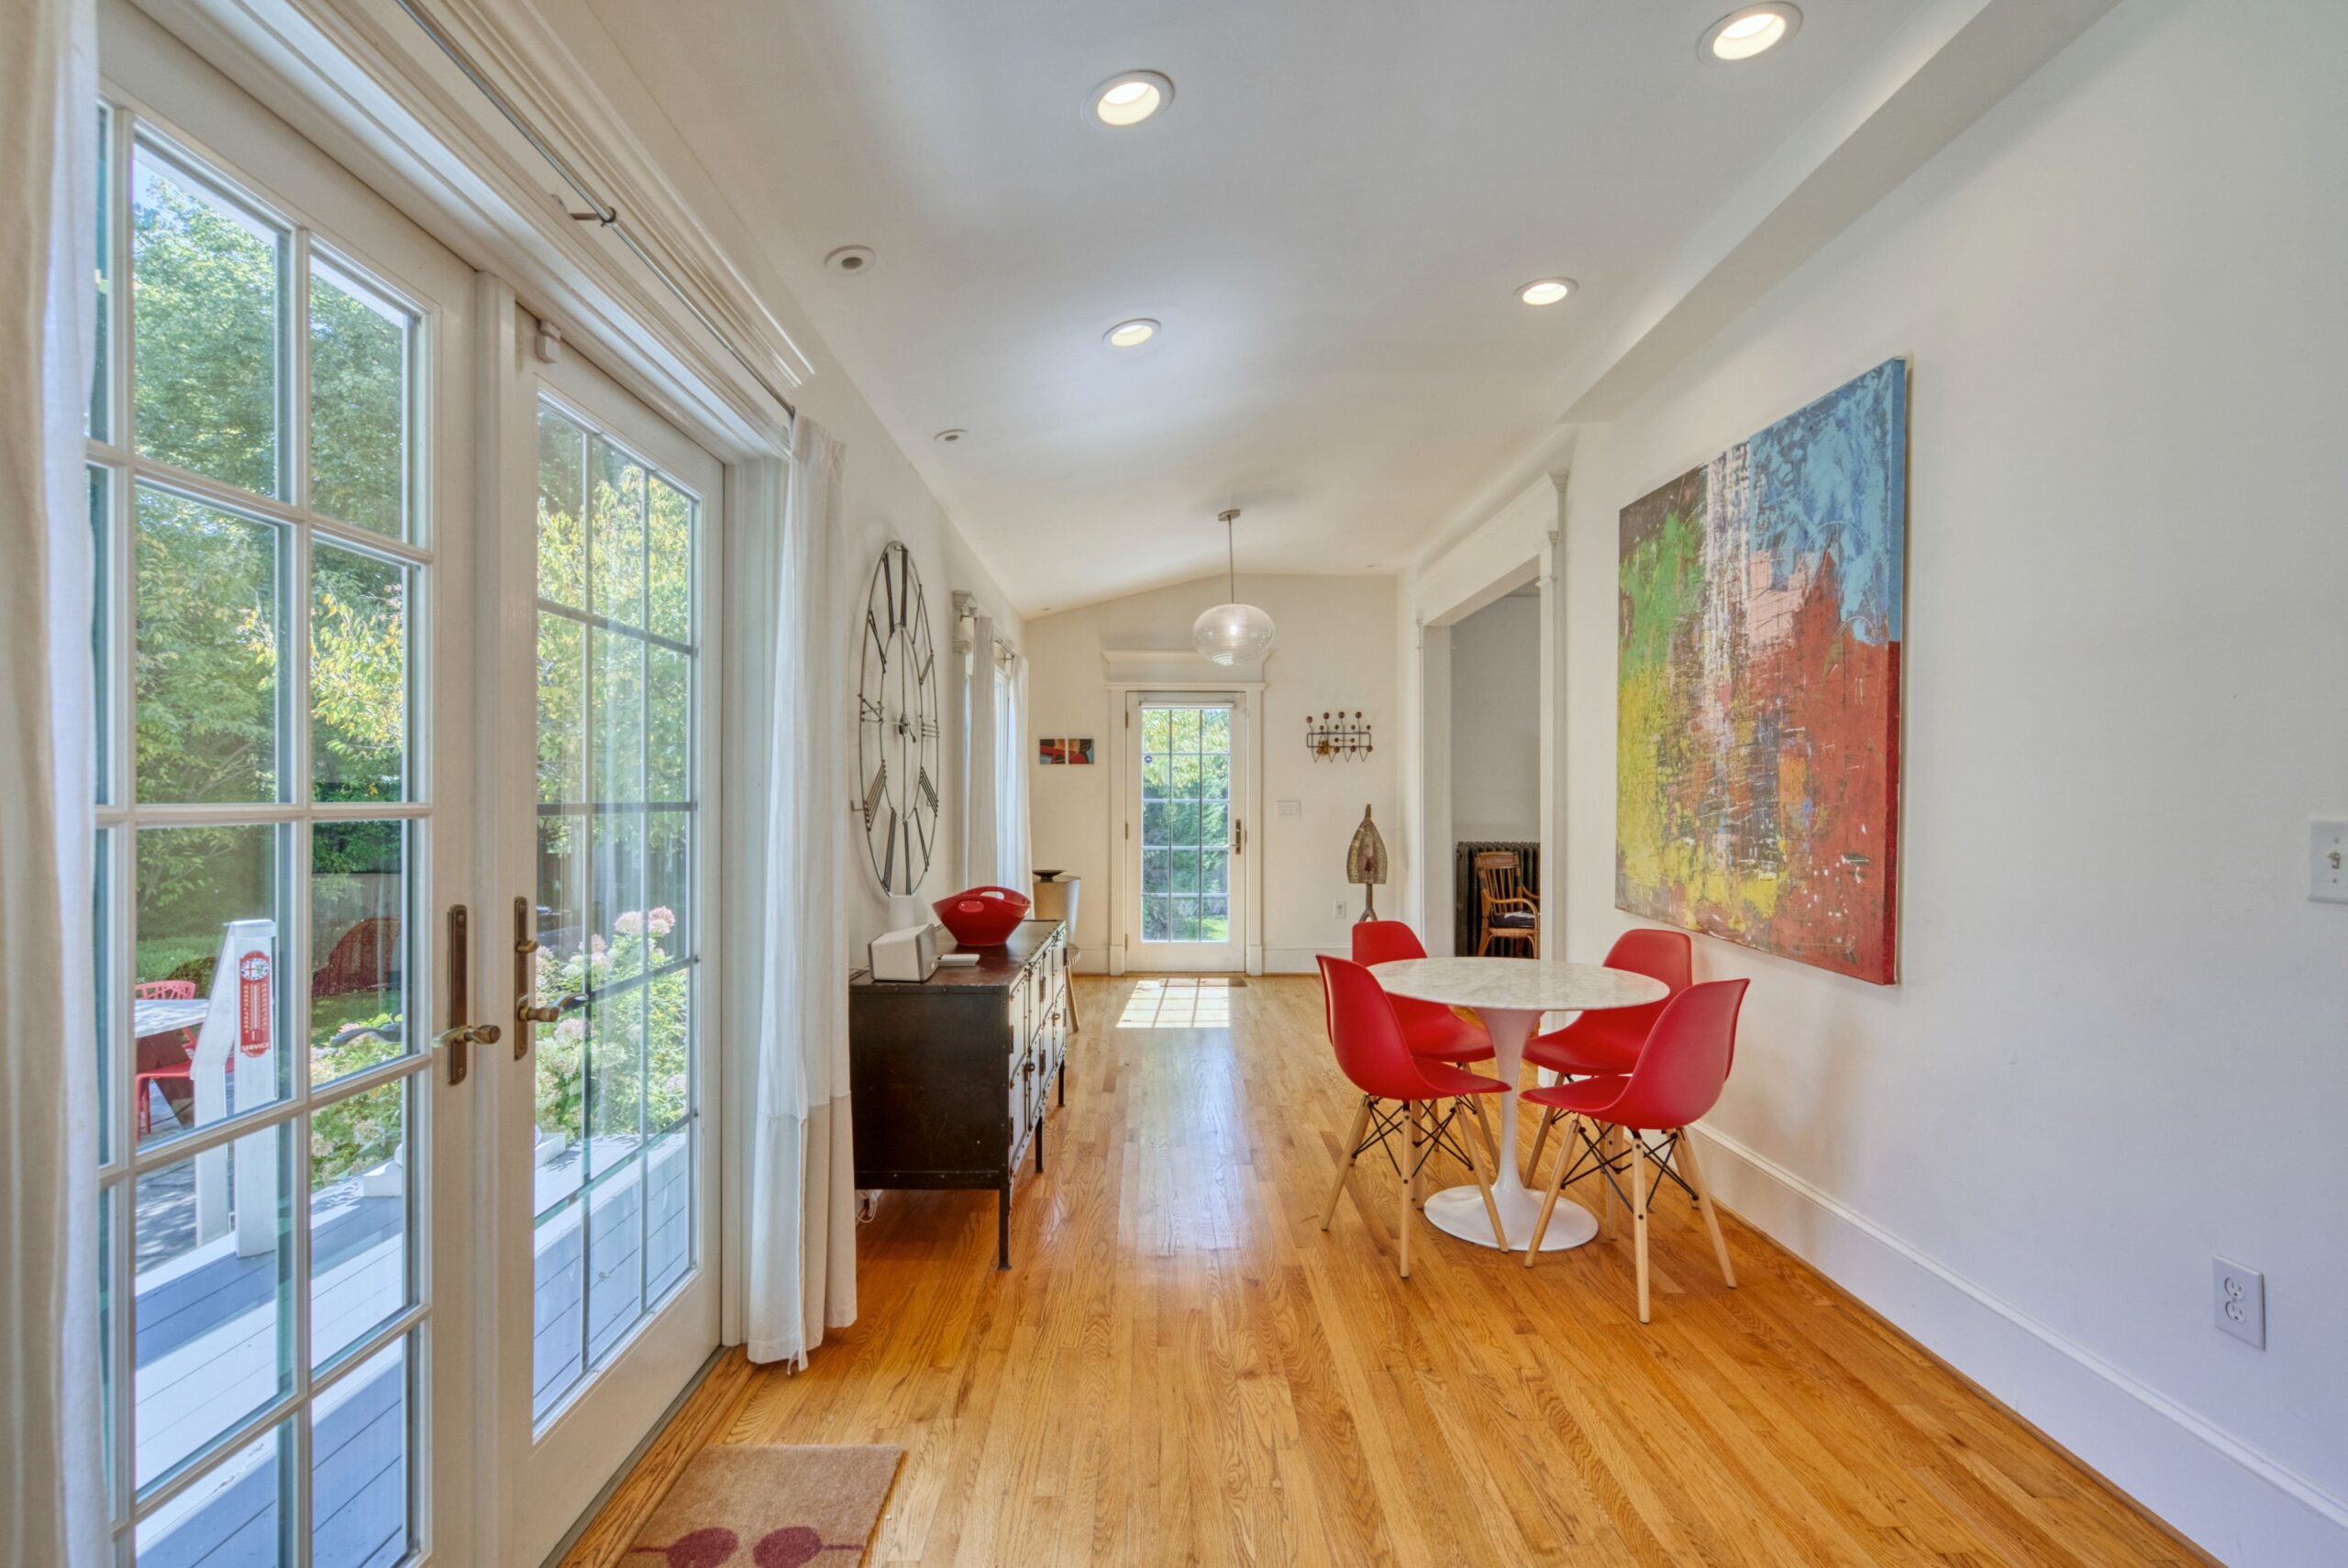 Interior professional photo of 1826 Varnum St NW - showing a bistro table on hardwood floors in a wide hallway at the back of the home